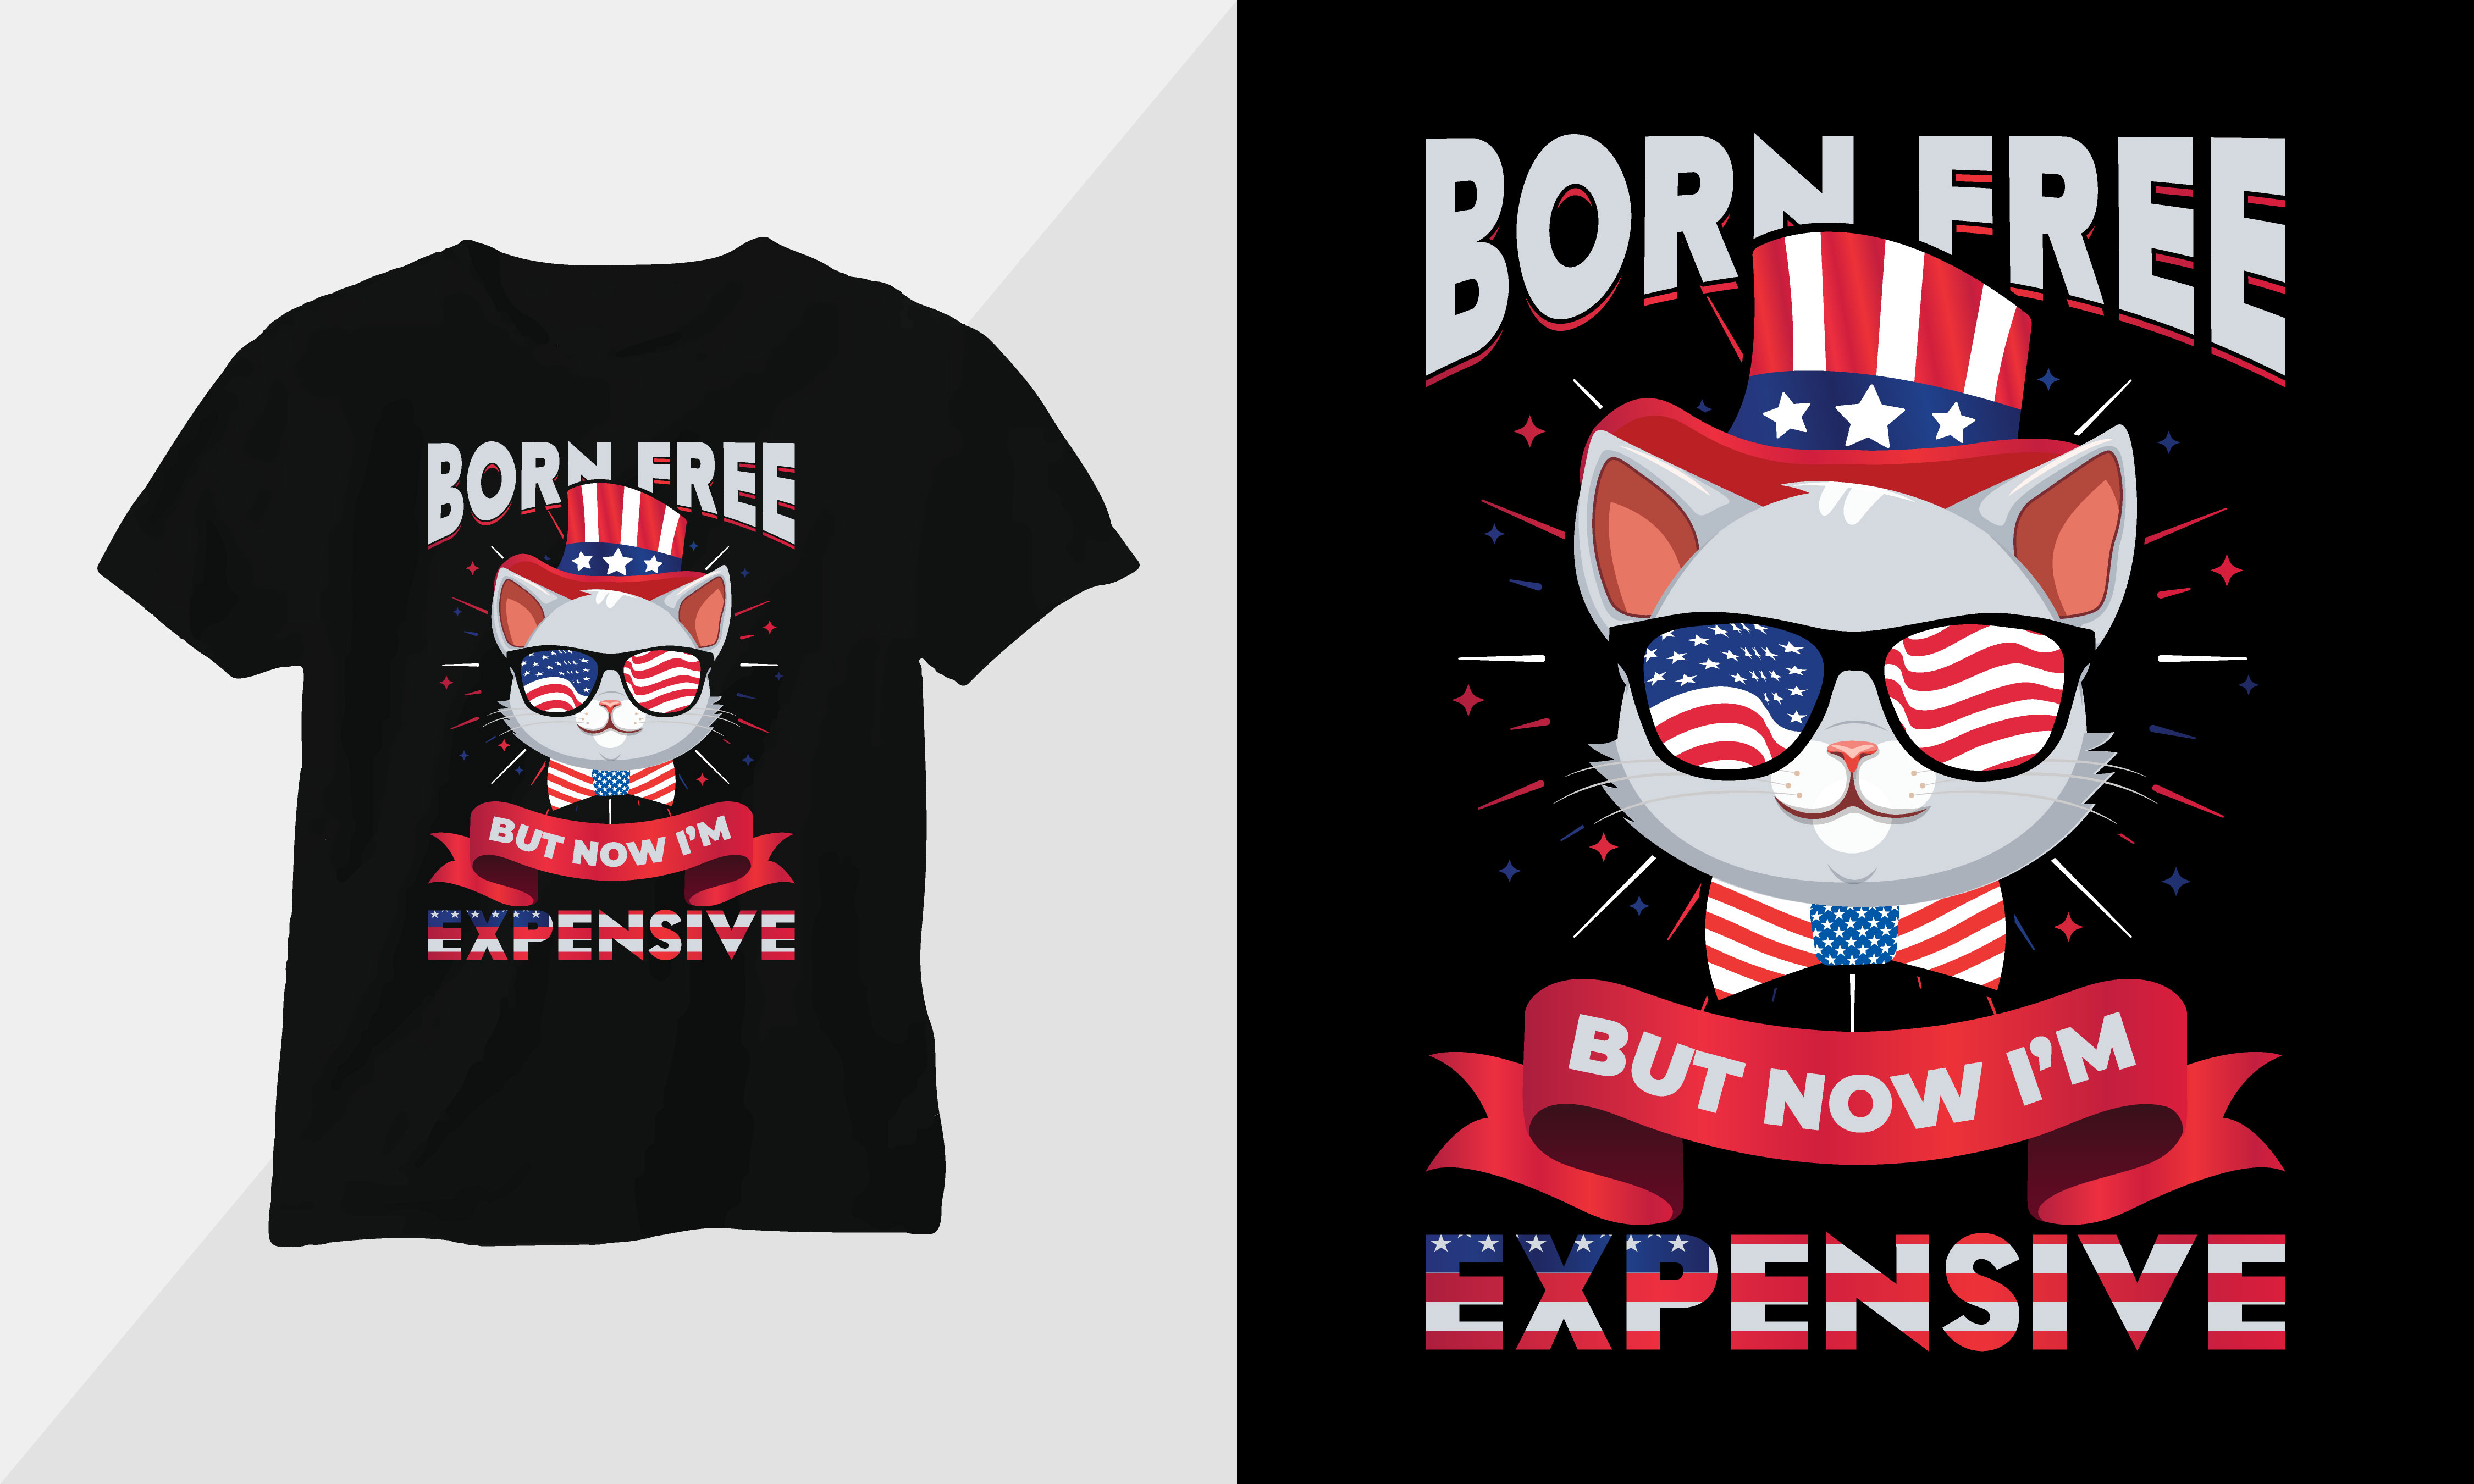 born free but now im expensive 02 205